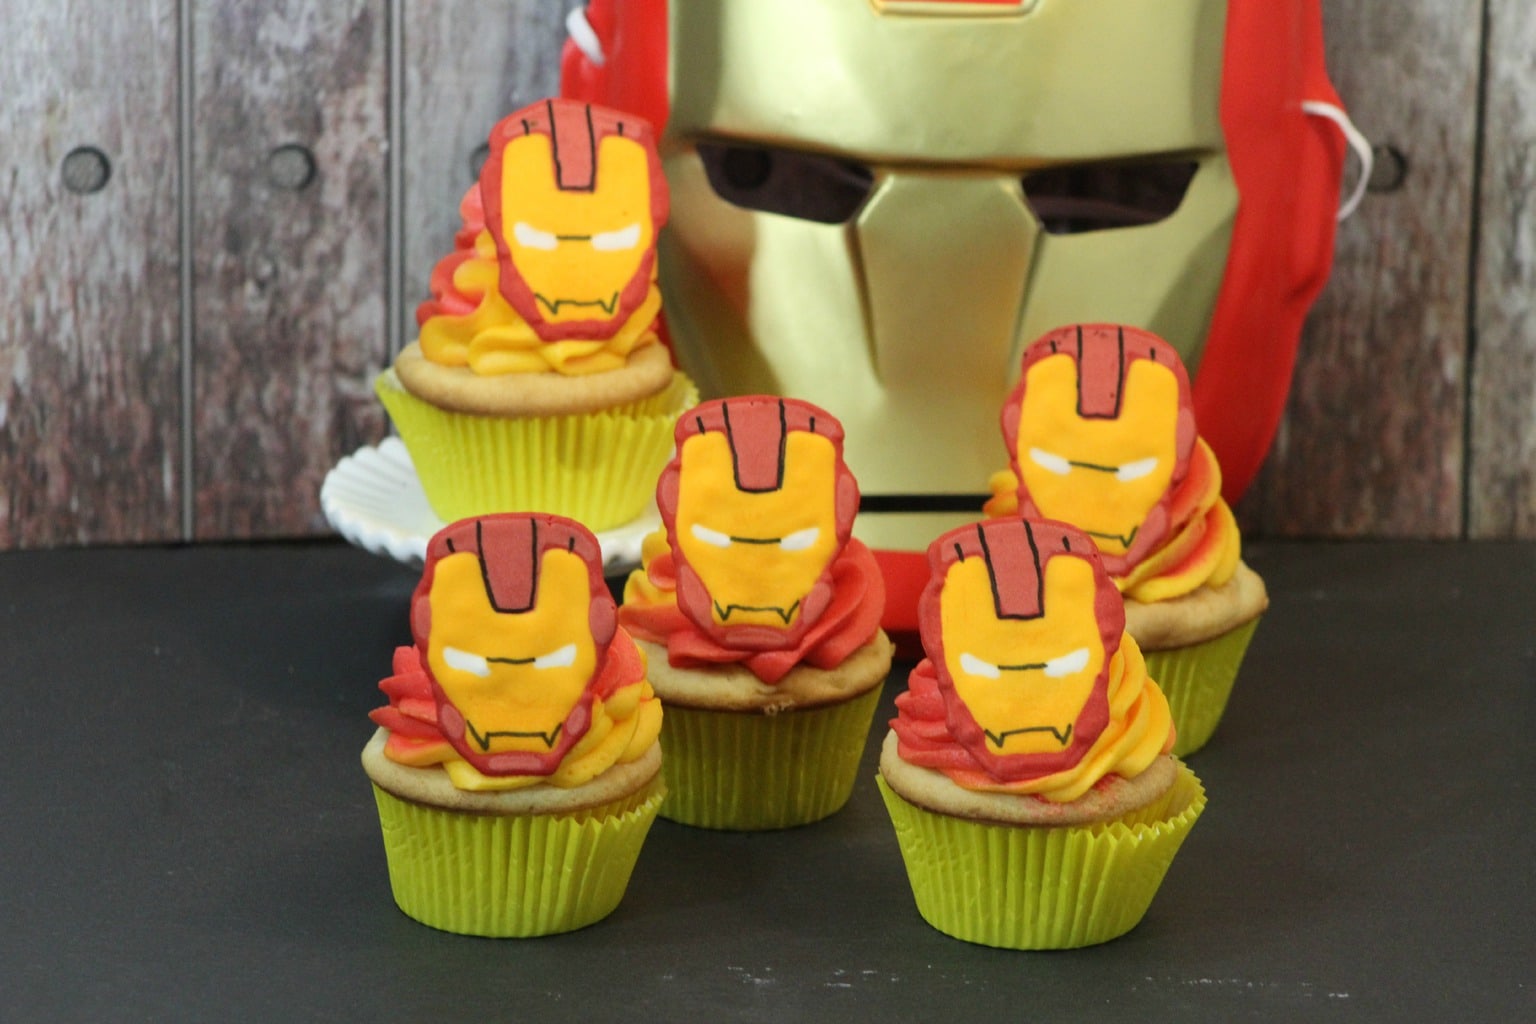 Who's ready for Iron Man Cupcakes? Have you decided who you're going to support in Captain America: Civil War? I know which team I'm on!